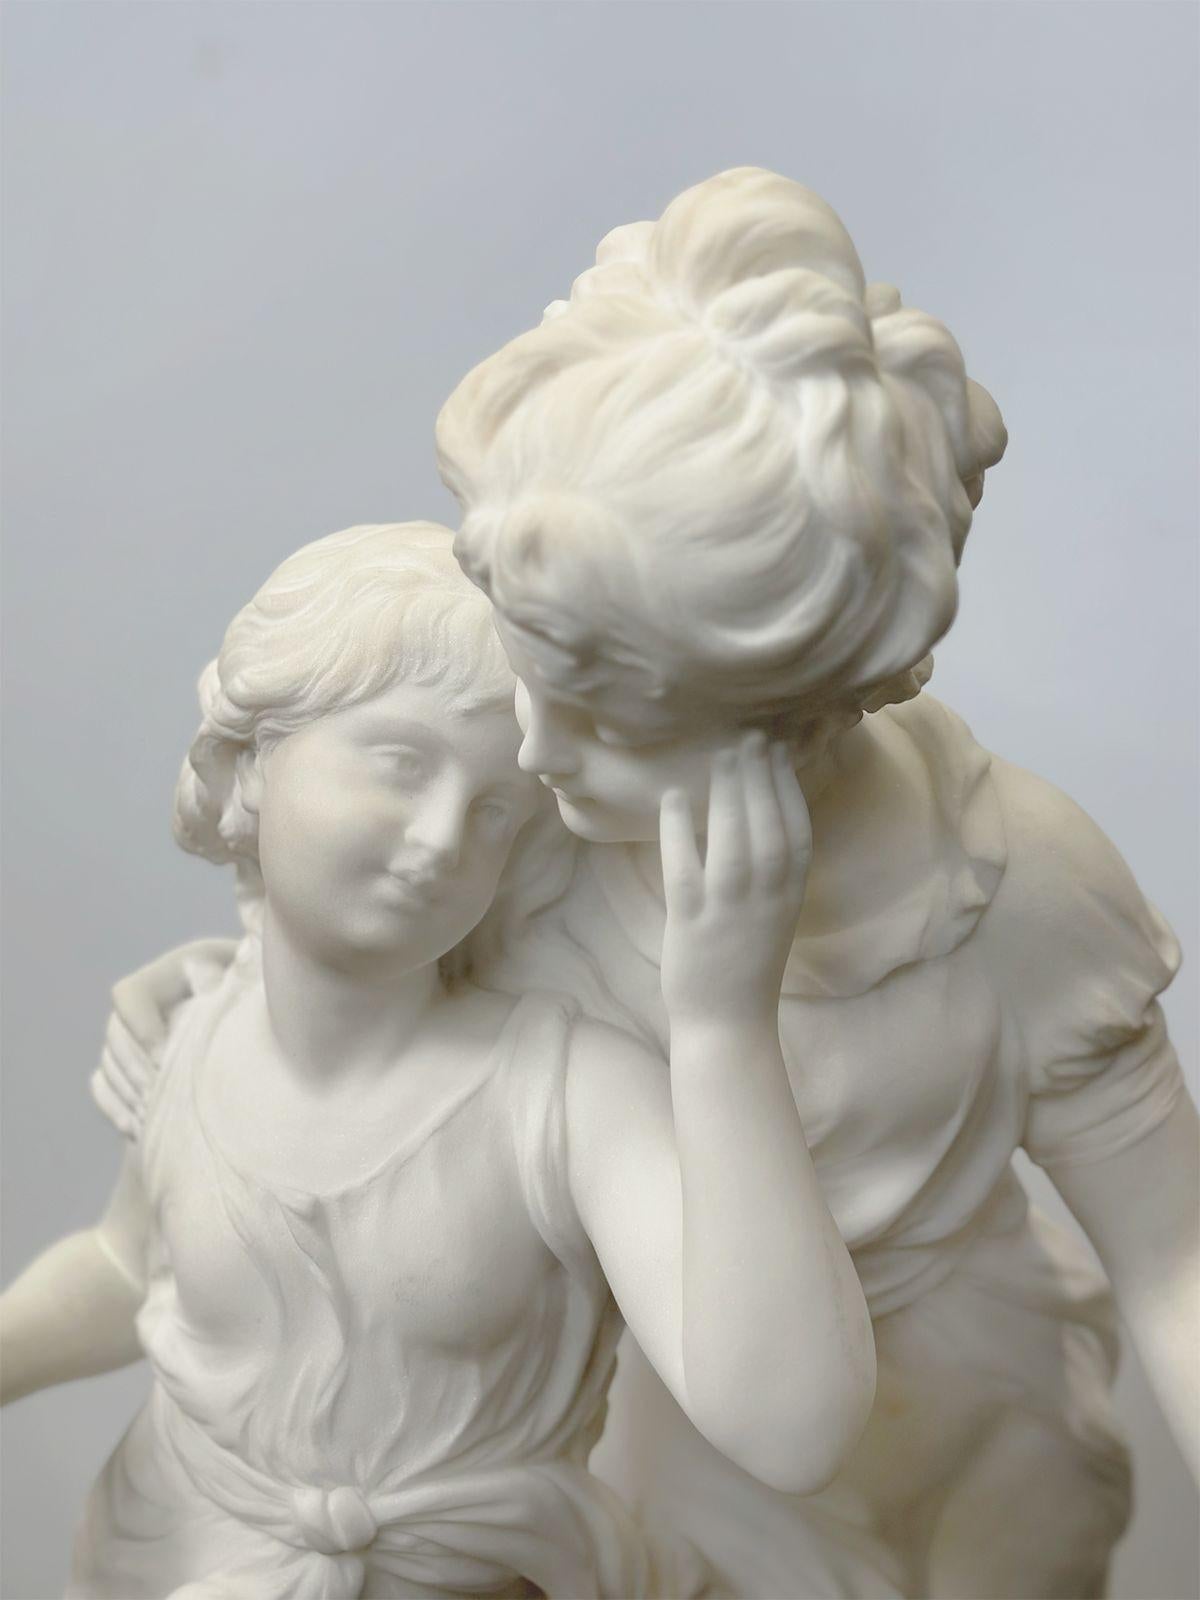 French late 19th century hand carved marble sculpture depicting two girls gracefully standing together with traditional wear, one appears to be holding a flower. Signed on the base 